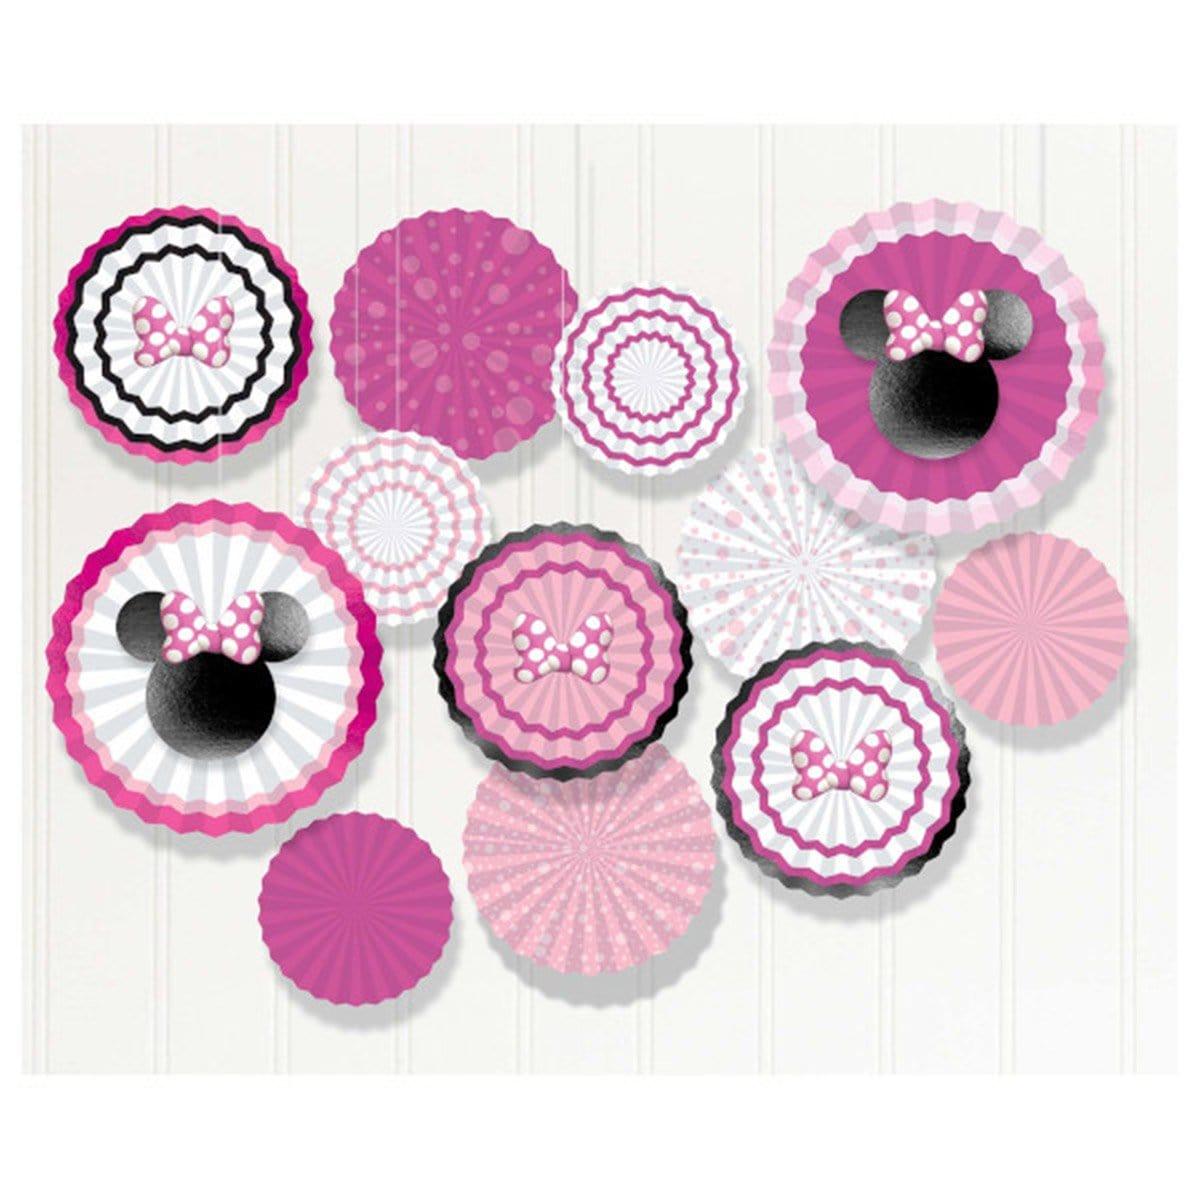 Buy Kids Birthday Minnie Mouse Forever, paper fan decorating kit sold at Party Expert